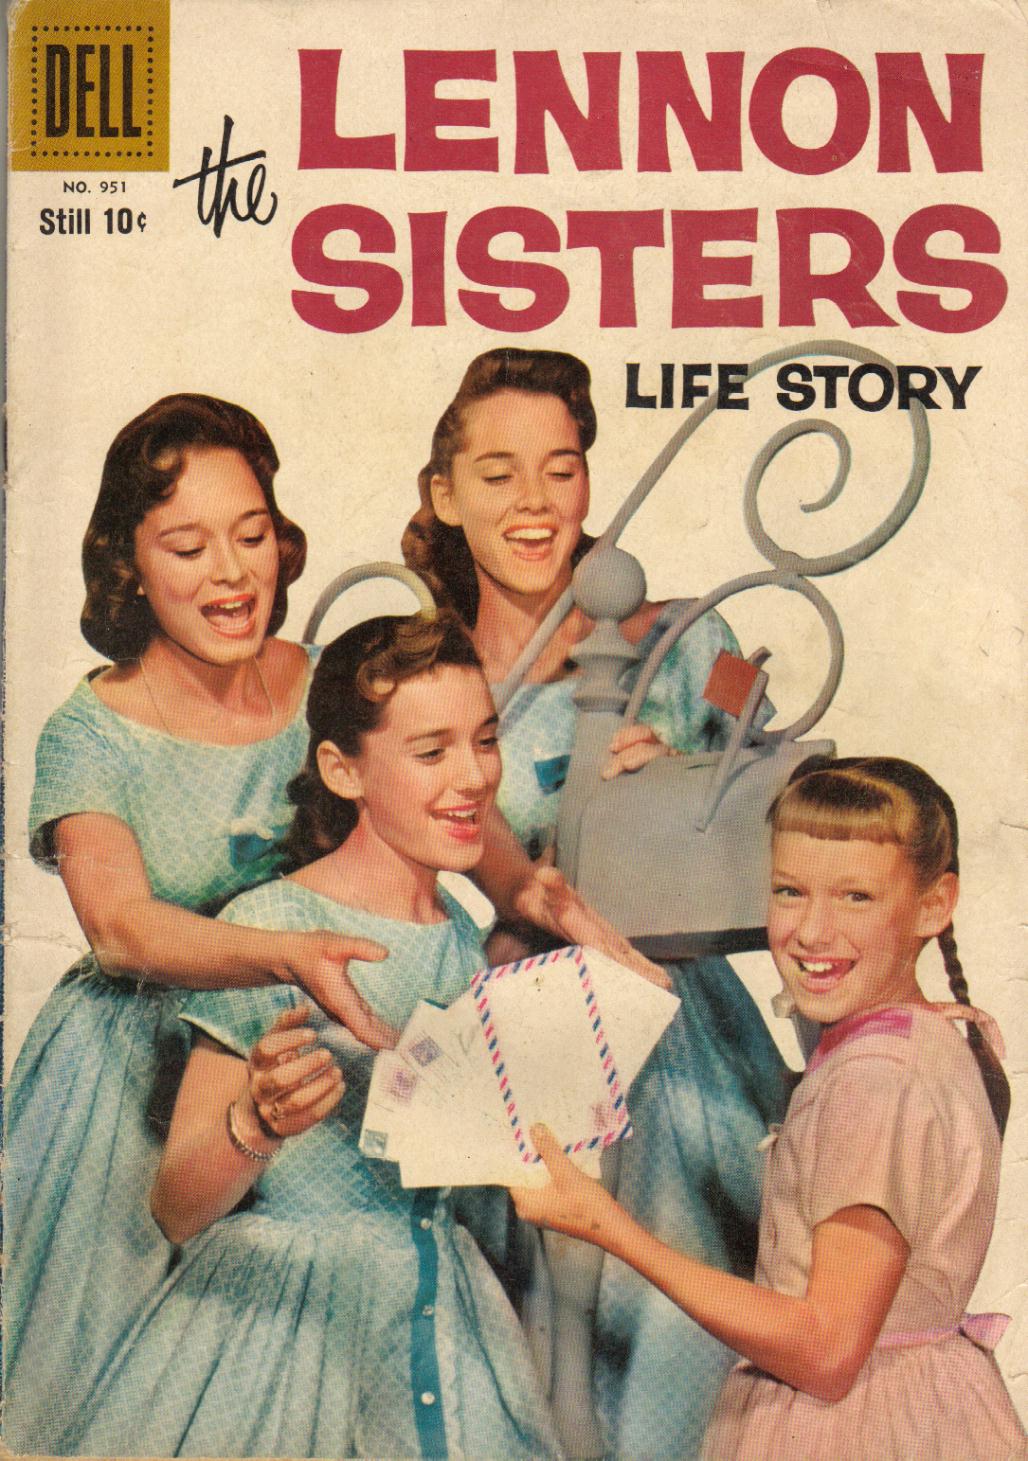 Book Cover For 0951 - The Lennon Sisters' Life Story